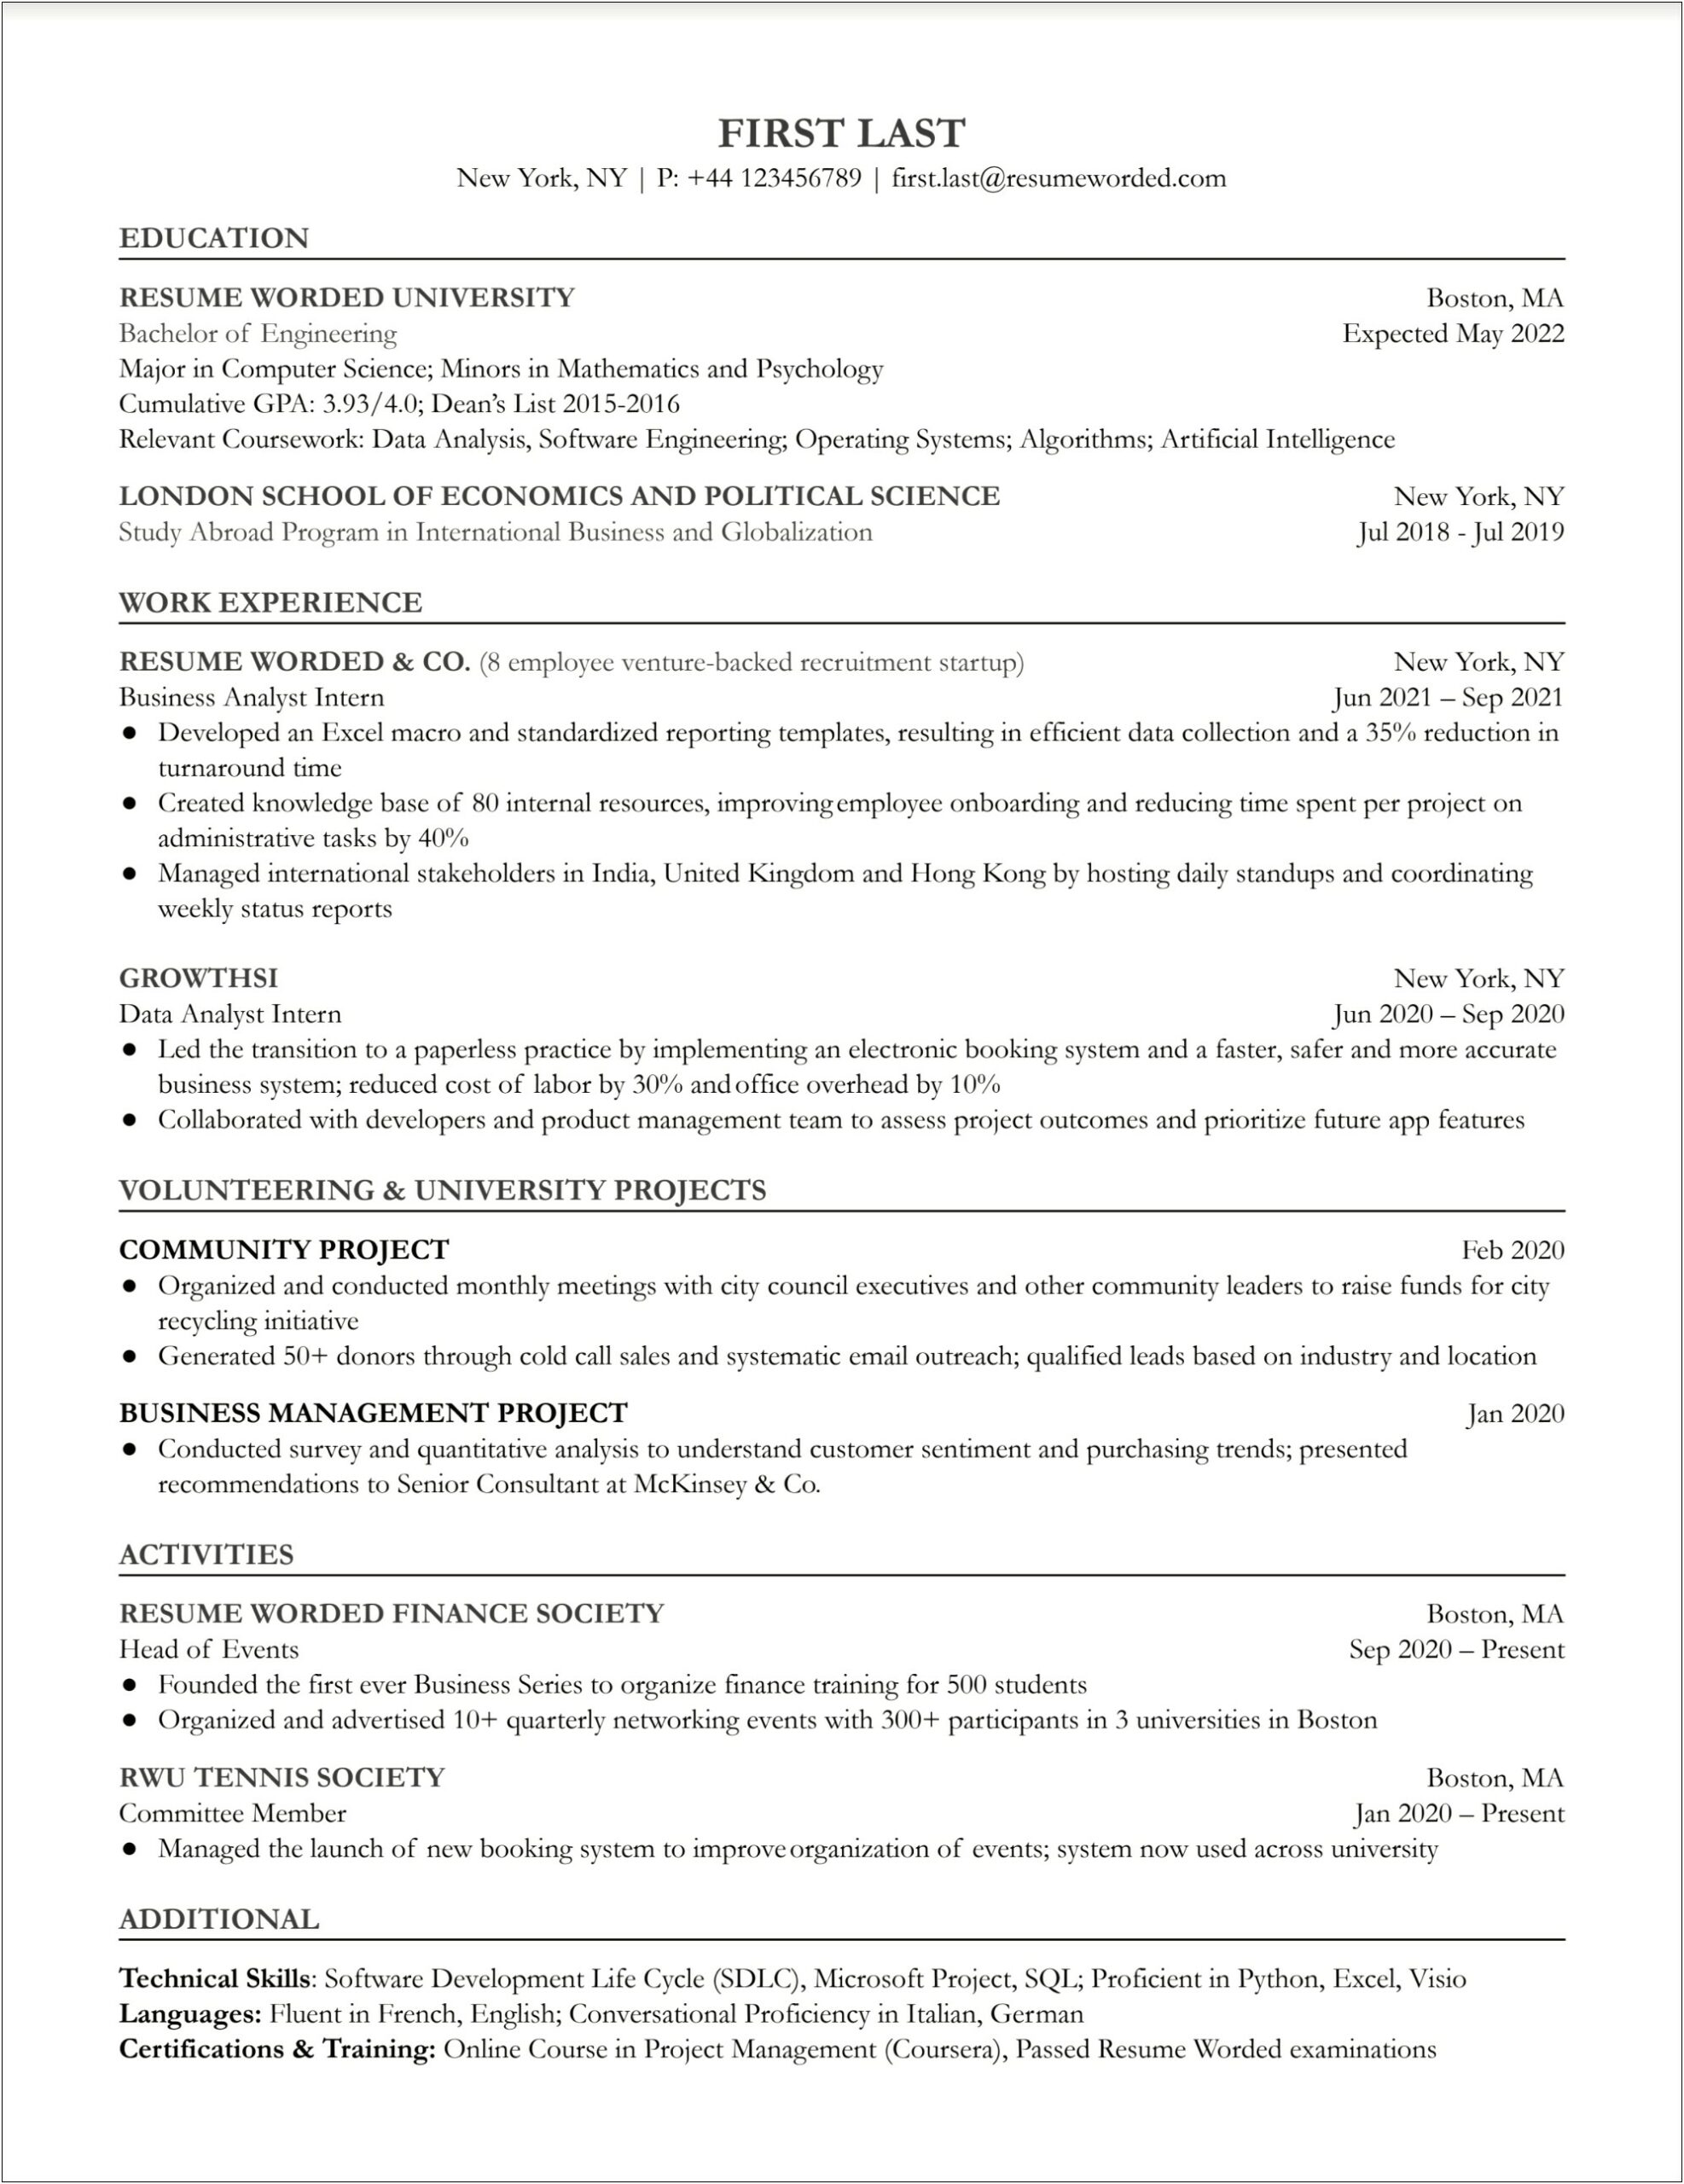 Resume Samples Financial Analyst Entry Level